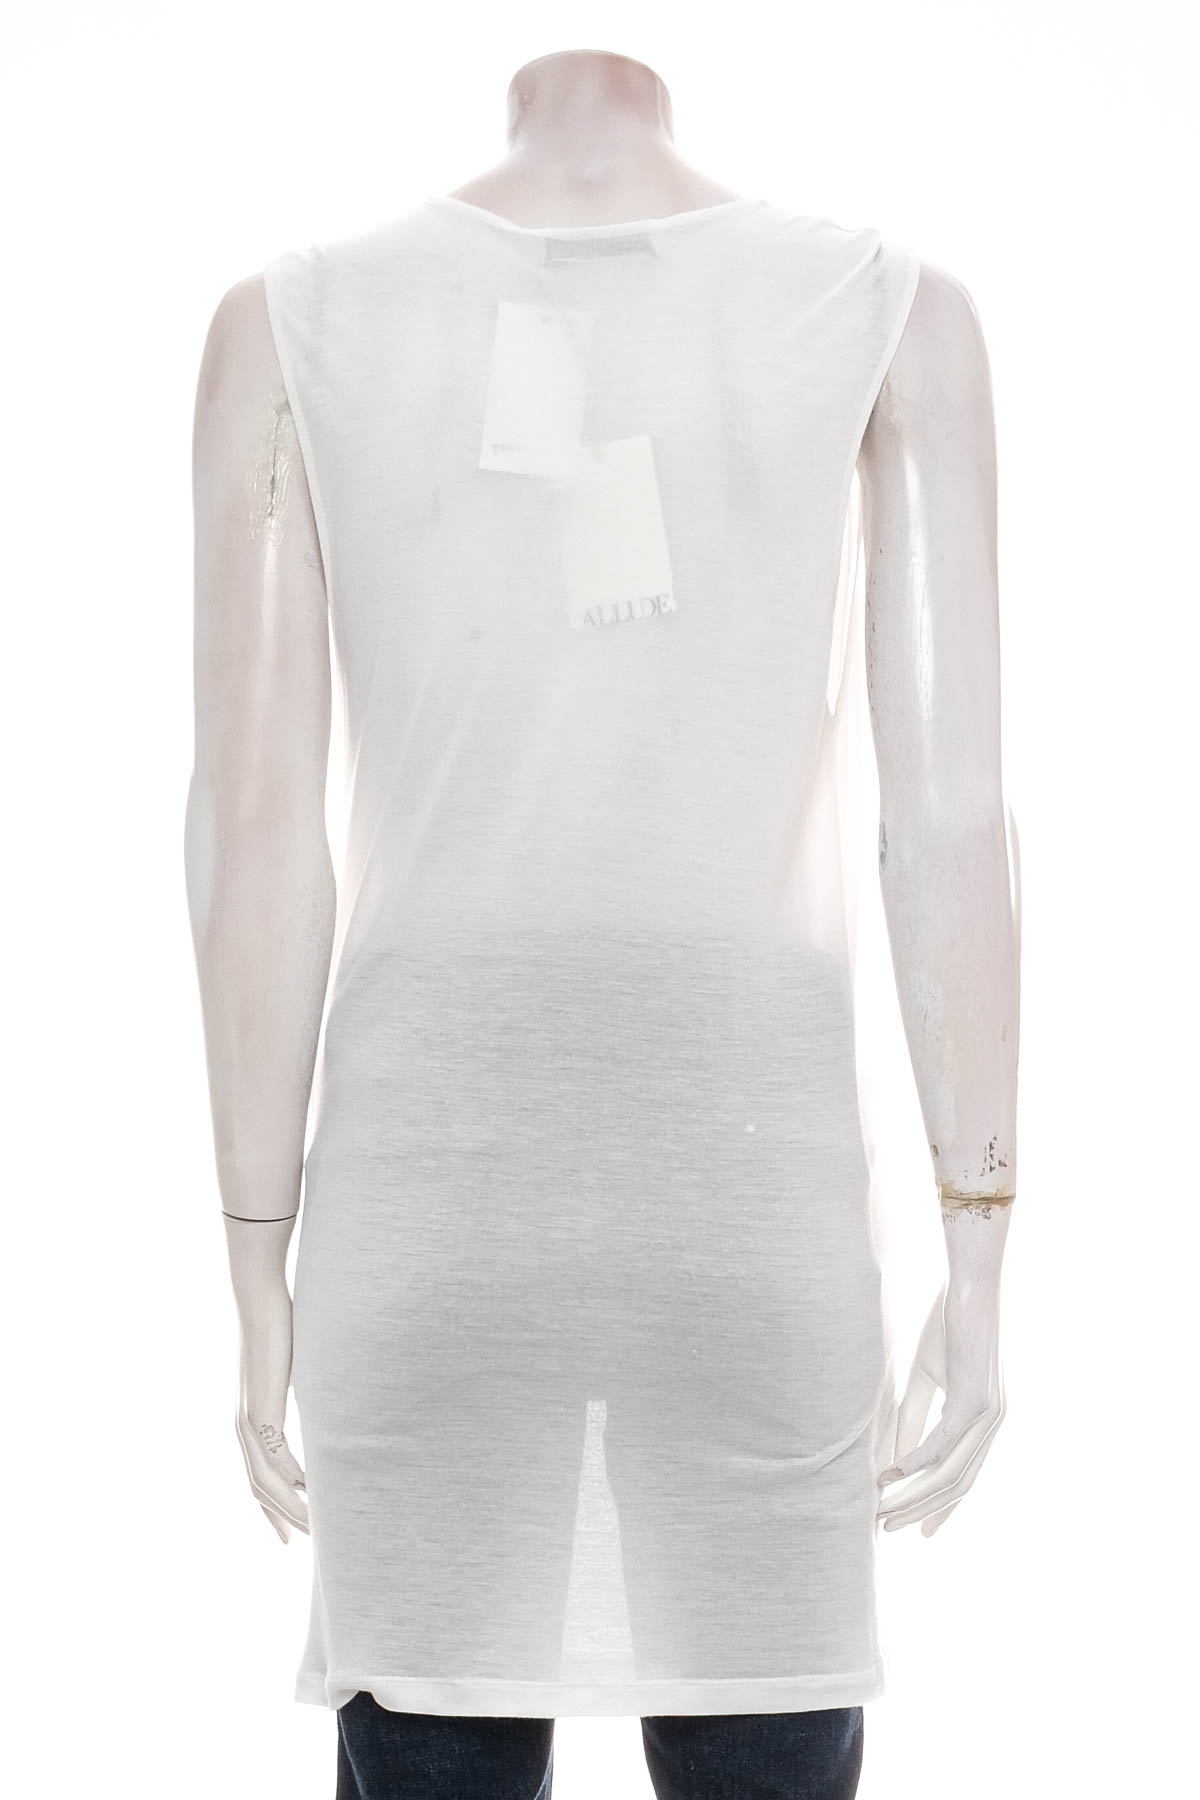 Women's top - ALLUDE - 1